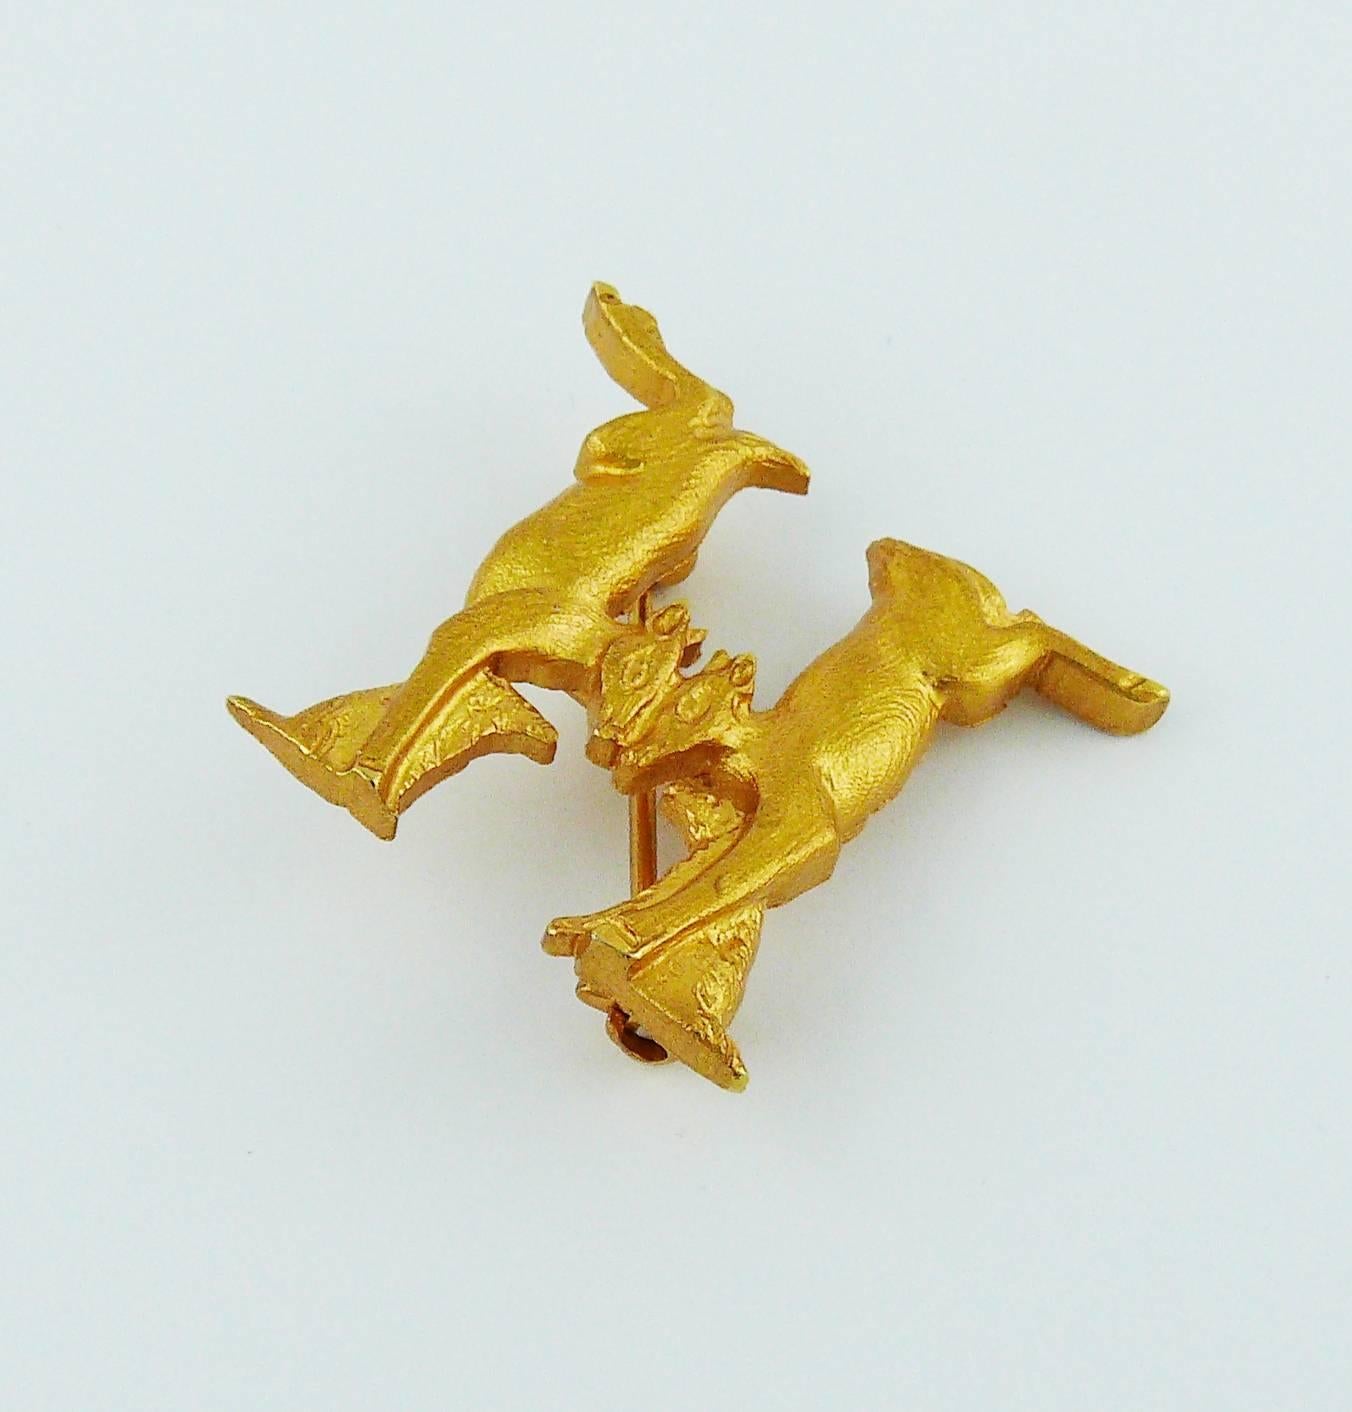 HERMES vintage gold toned inverted twin rabbits with dogs forming the initial H.

Marked HERMES Parfums.

Indicative measurements : height approx. 2.5 cm (0.98 inch) / max. width approx. 2.6 cm (1.02 inches).

JEWELRY CONDITION CHART
- New or never